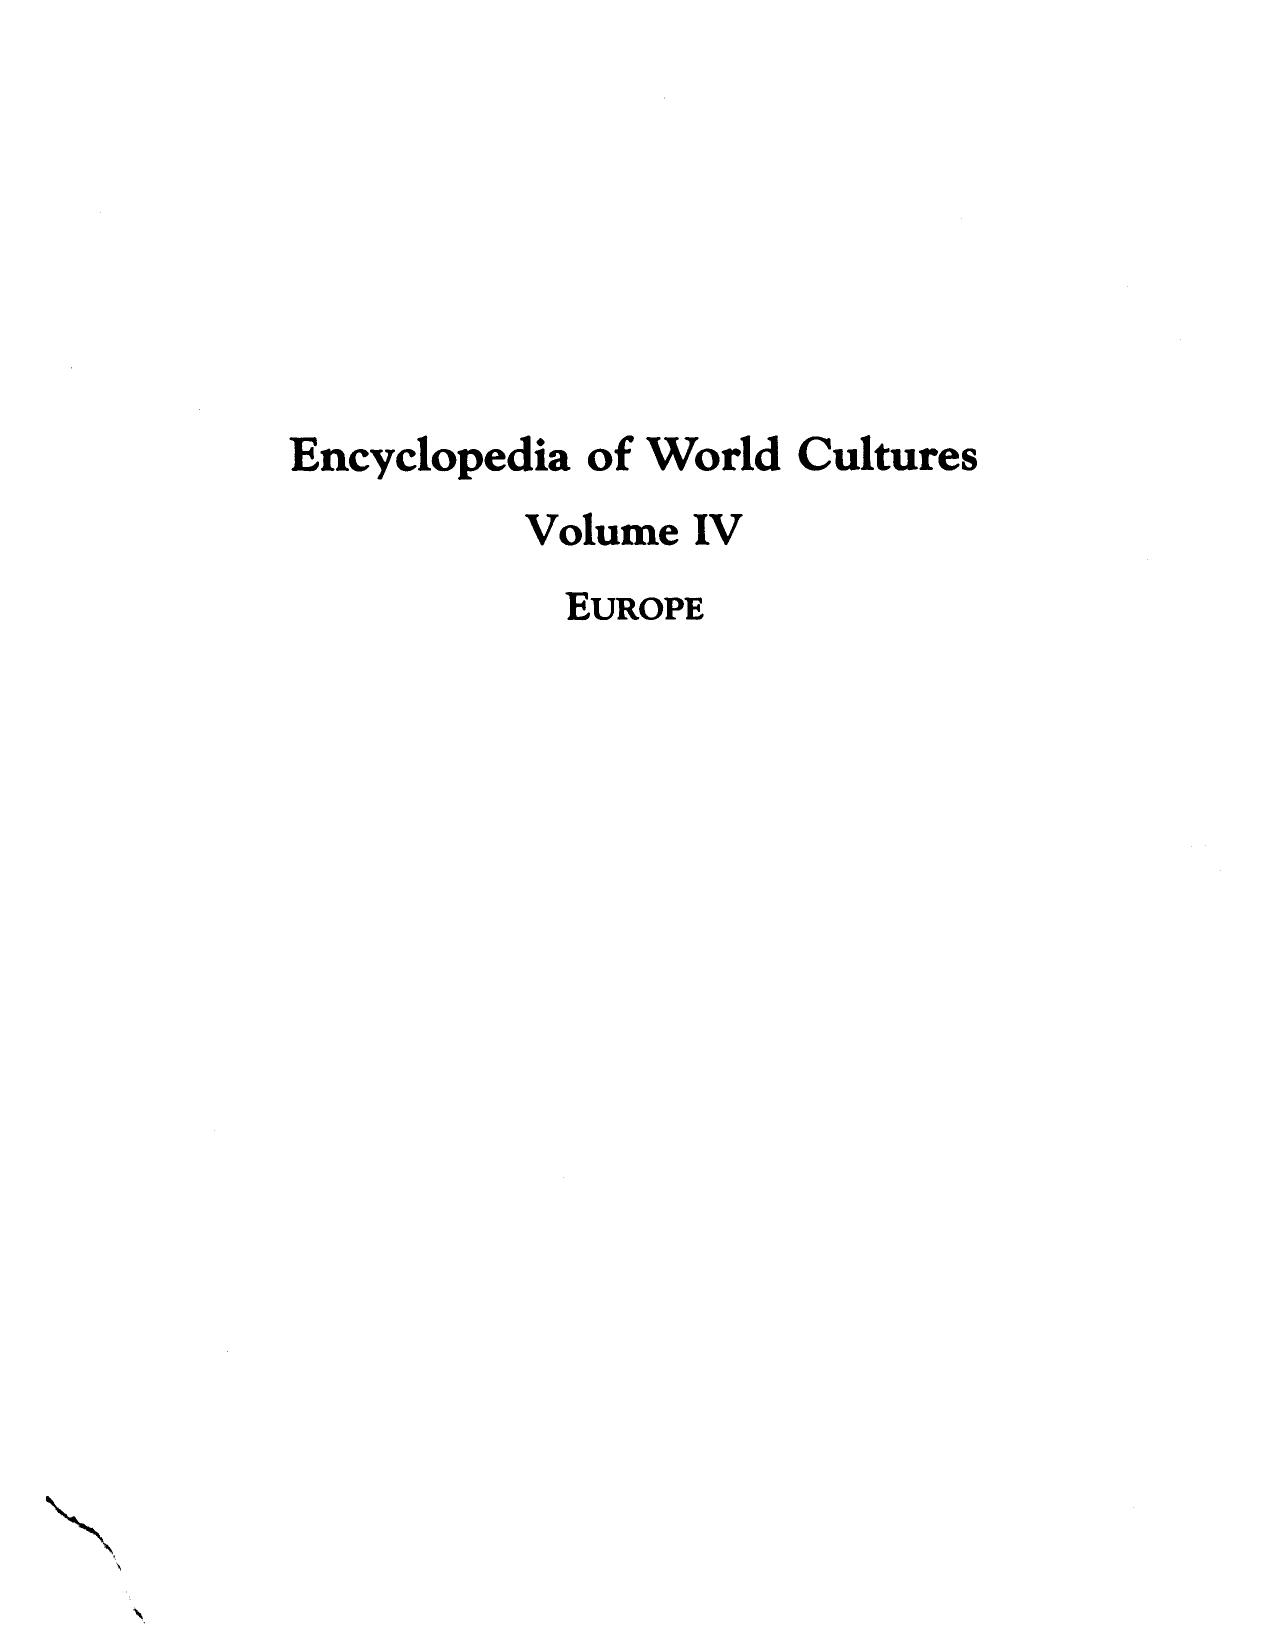 Encyclopedia of World Cultures Europe and the Middle East by David Levinson